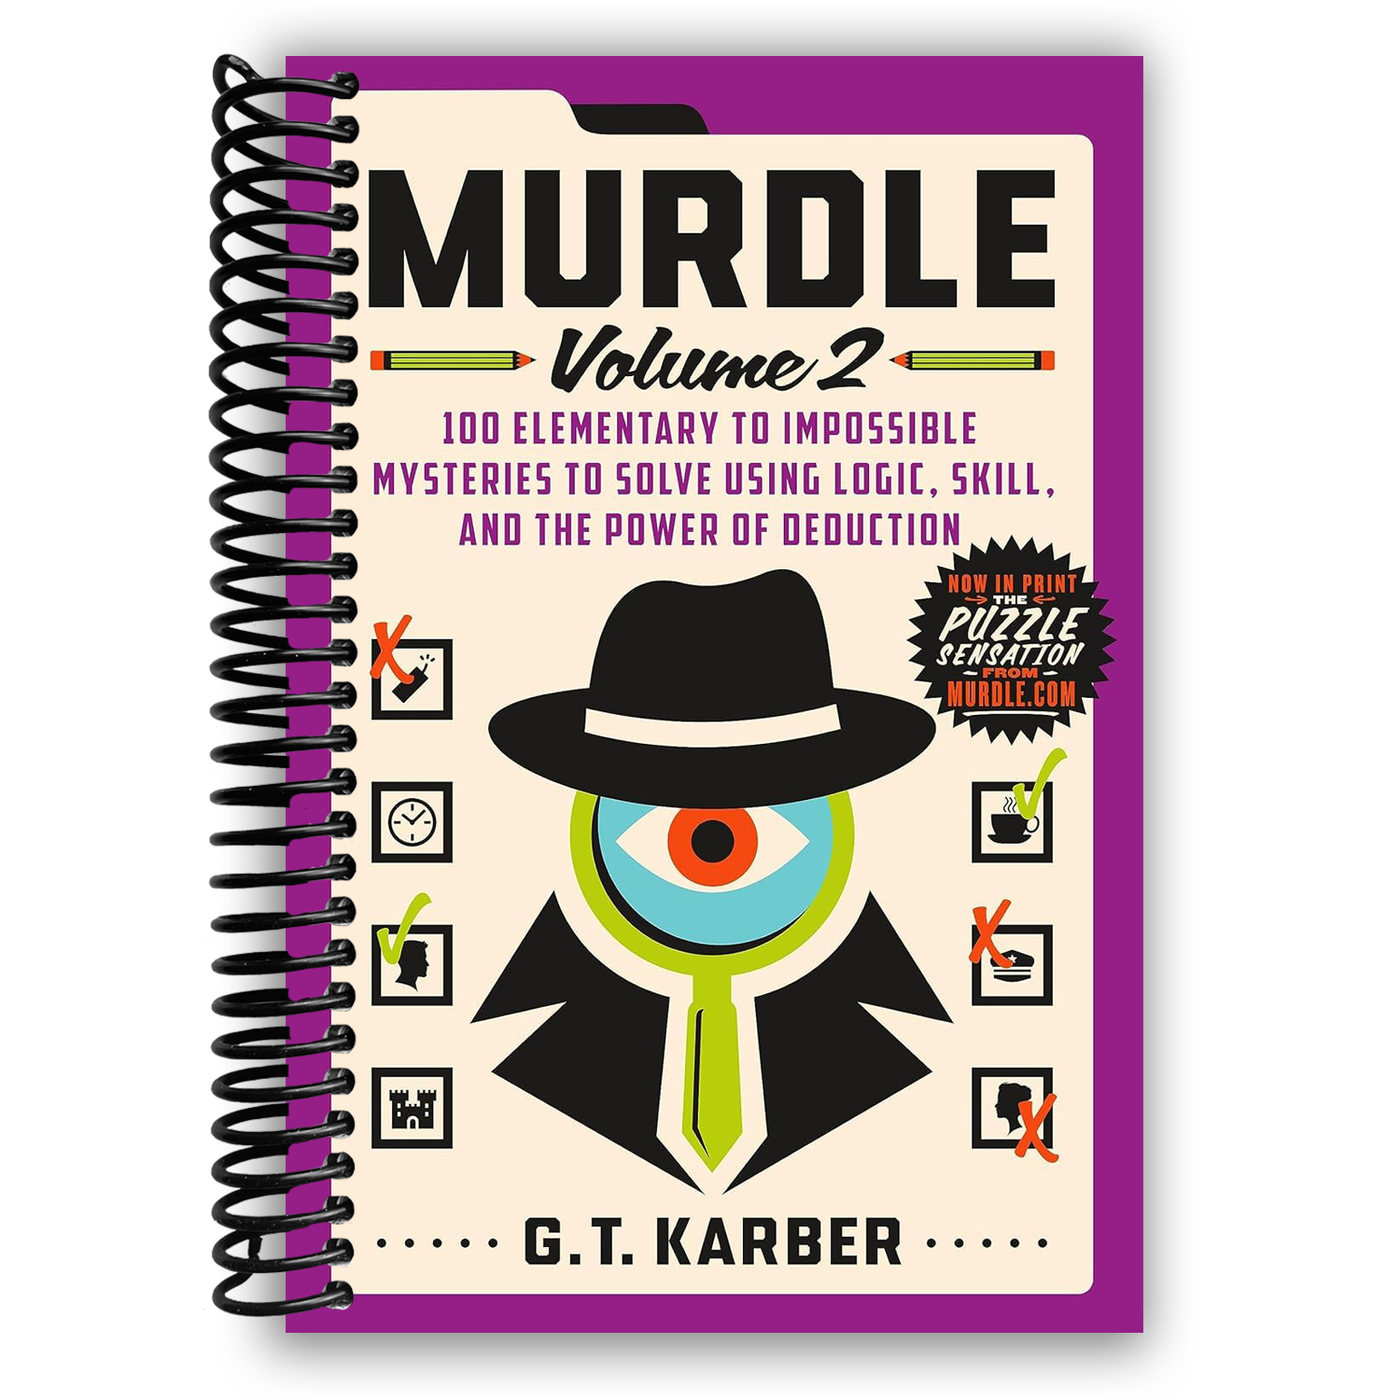 Murdle: Volume 2: 100 Elementary to Impossible Mysteries to Solve Using Logic, Skill, and the Power of Deduction (Murdle, 2) (Spiral Bound)